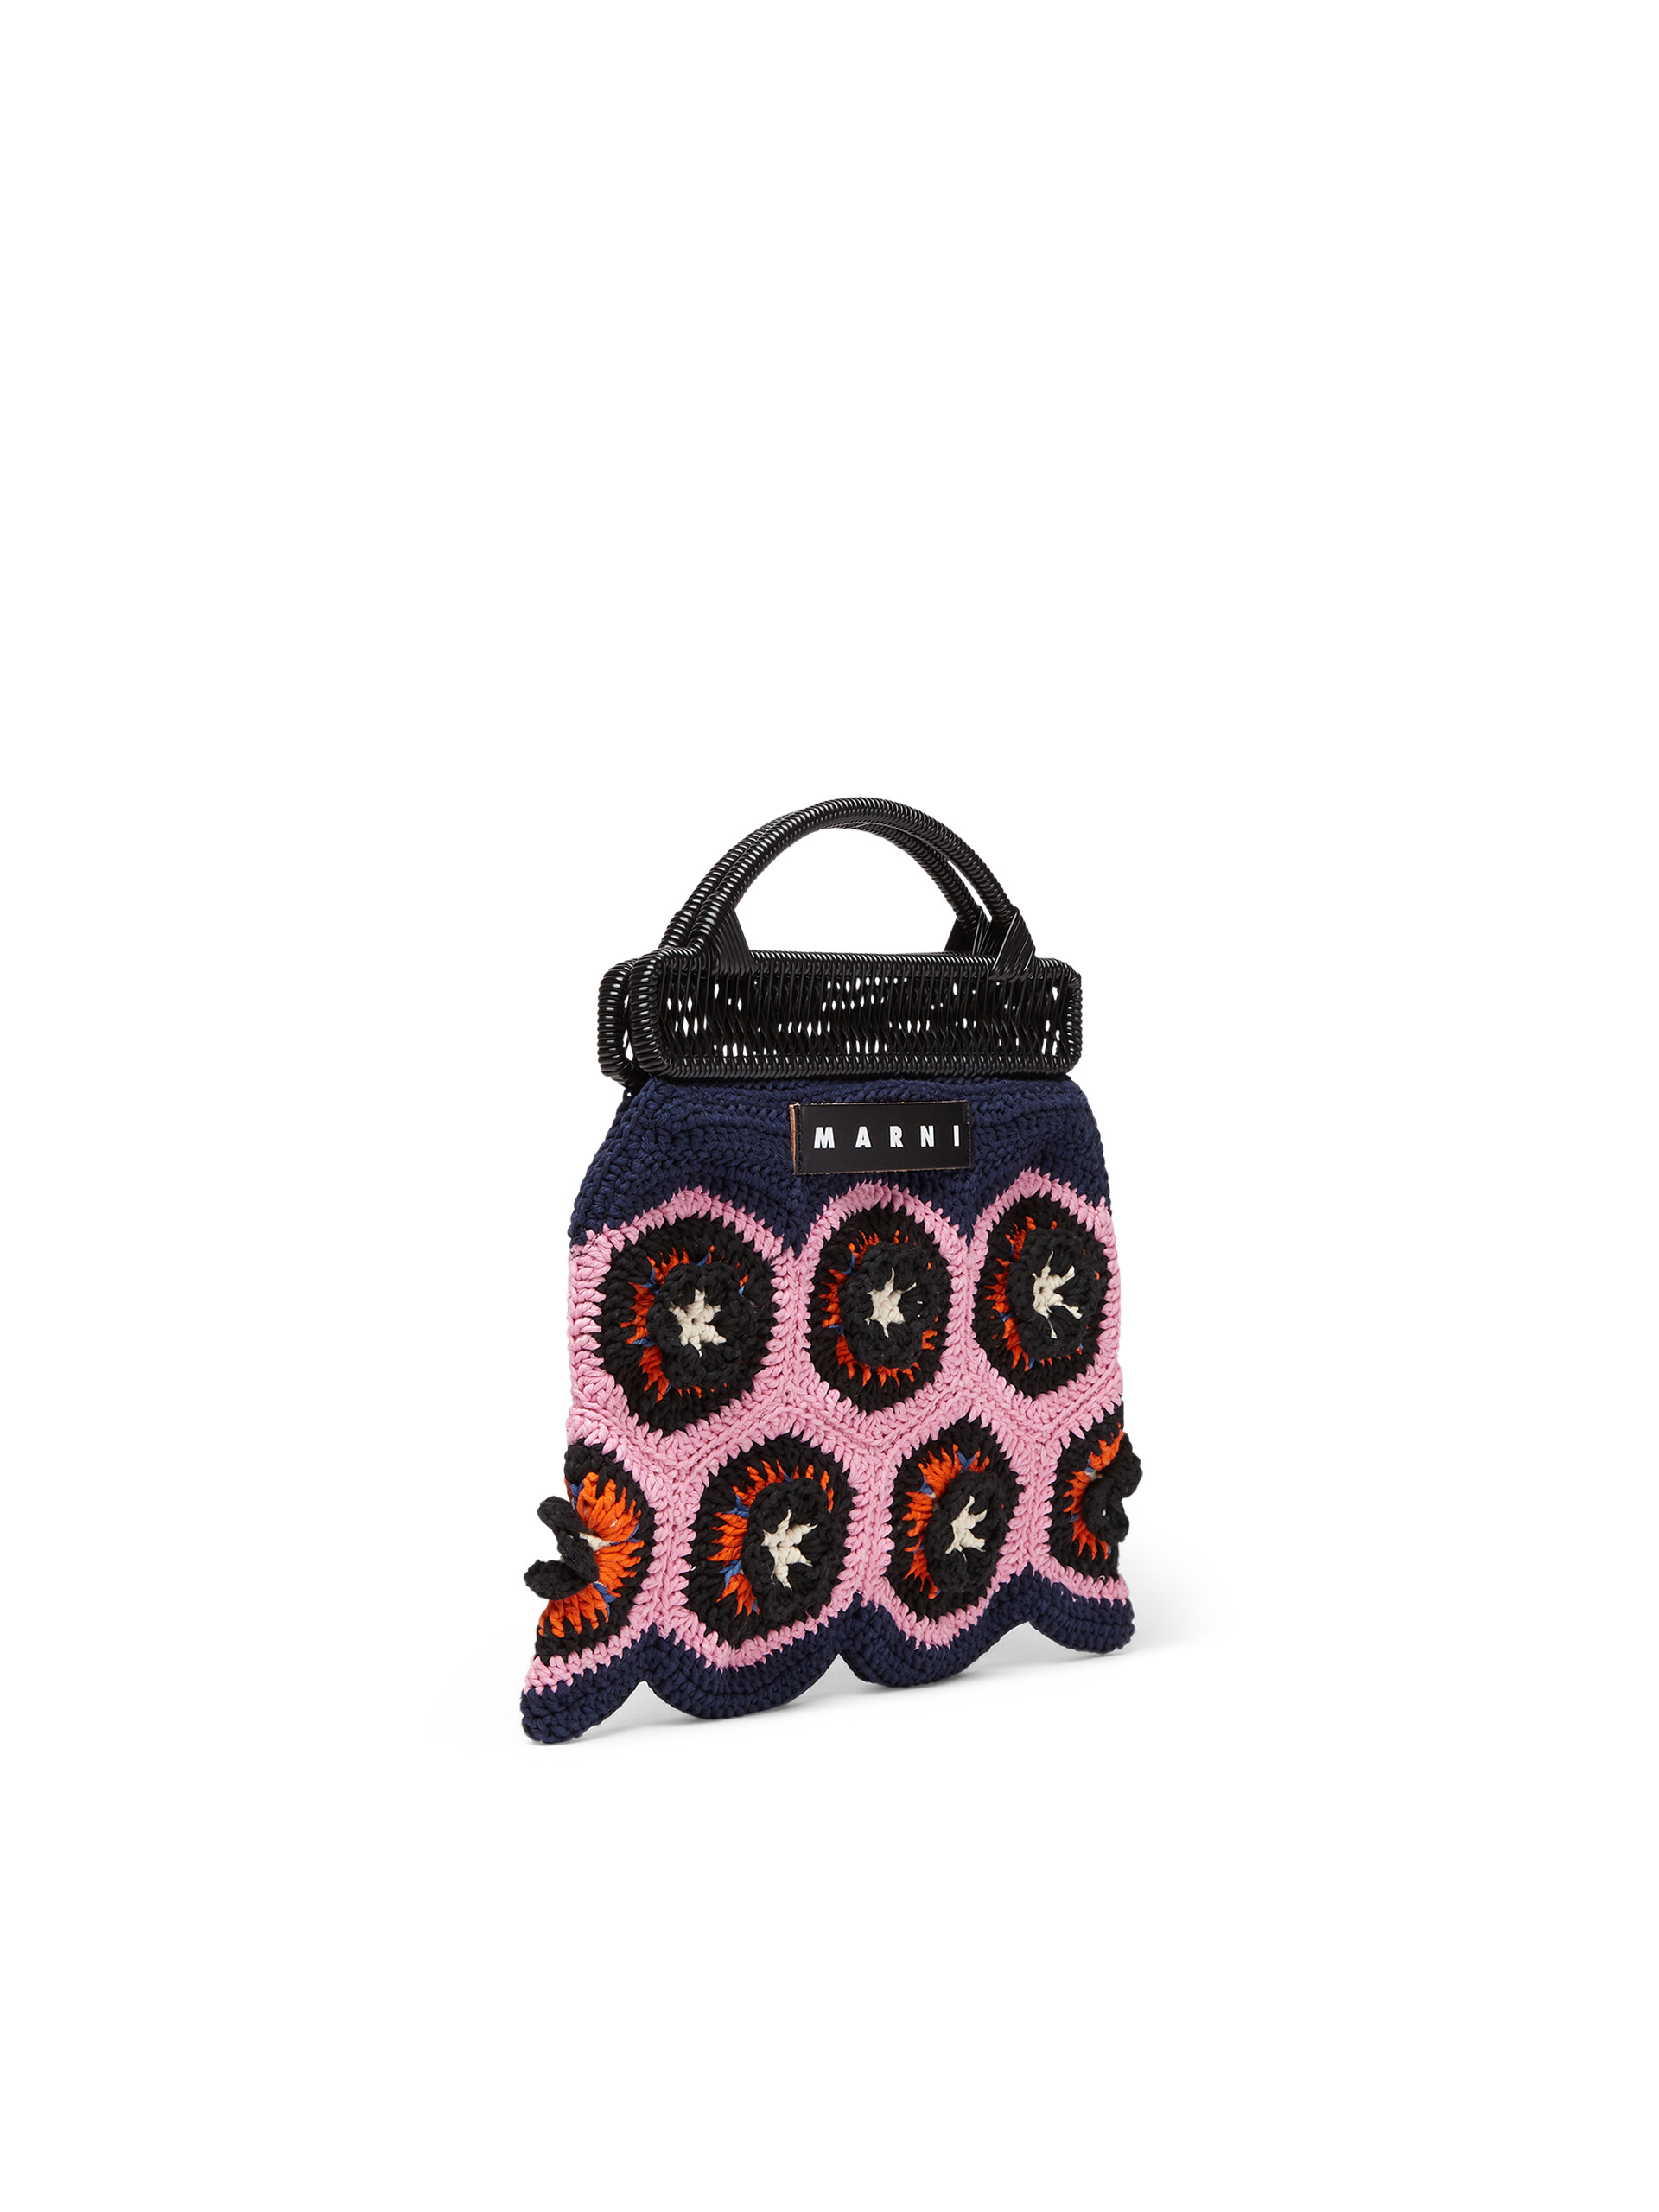 MARNI MARKET bag in pink and blue crochet cotton - Bags - Image 2